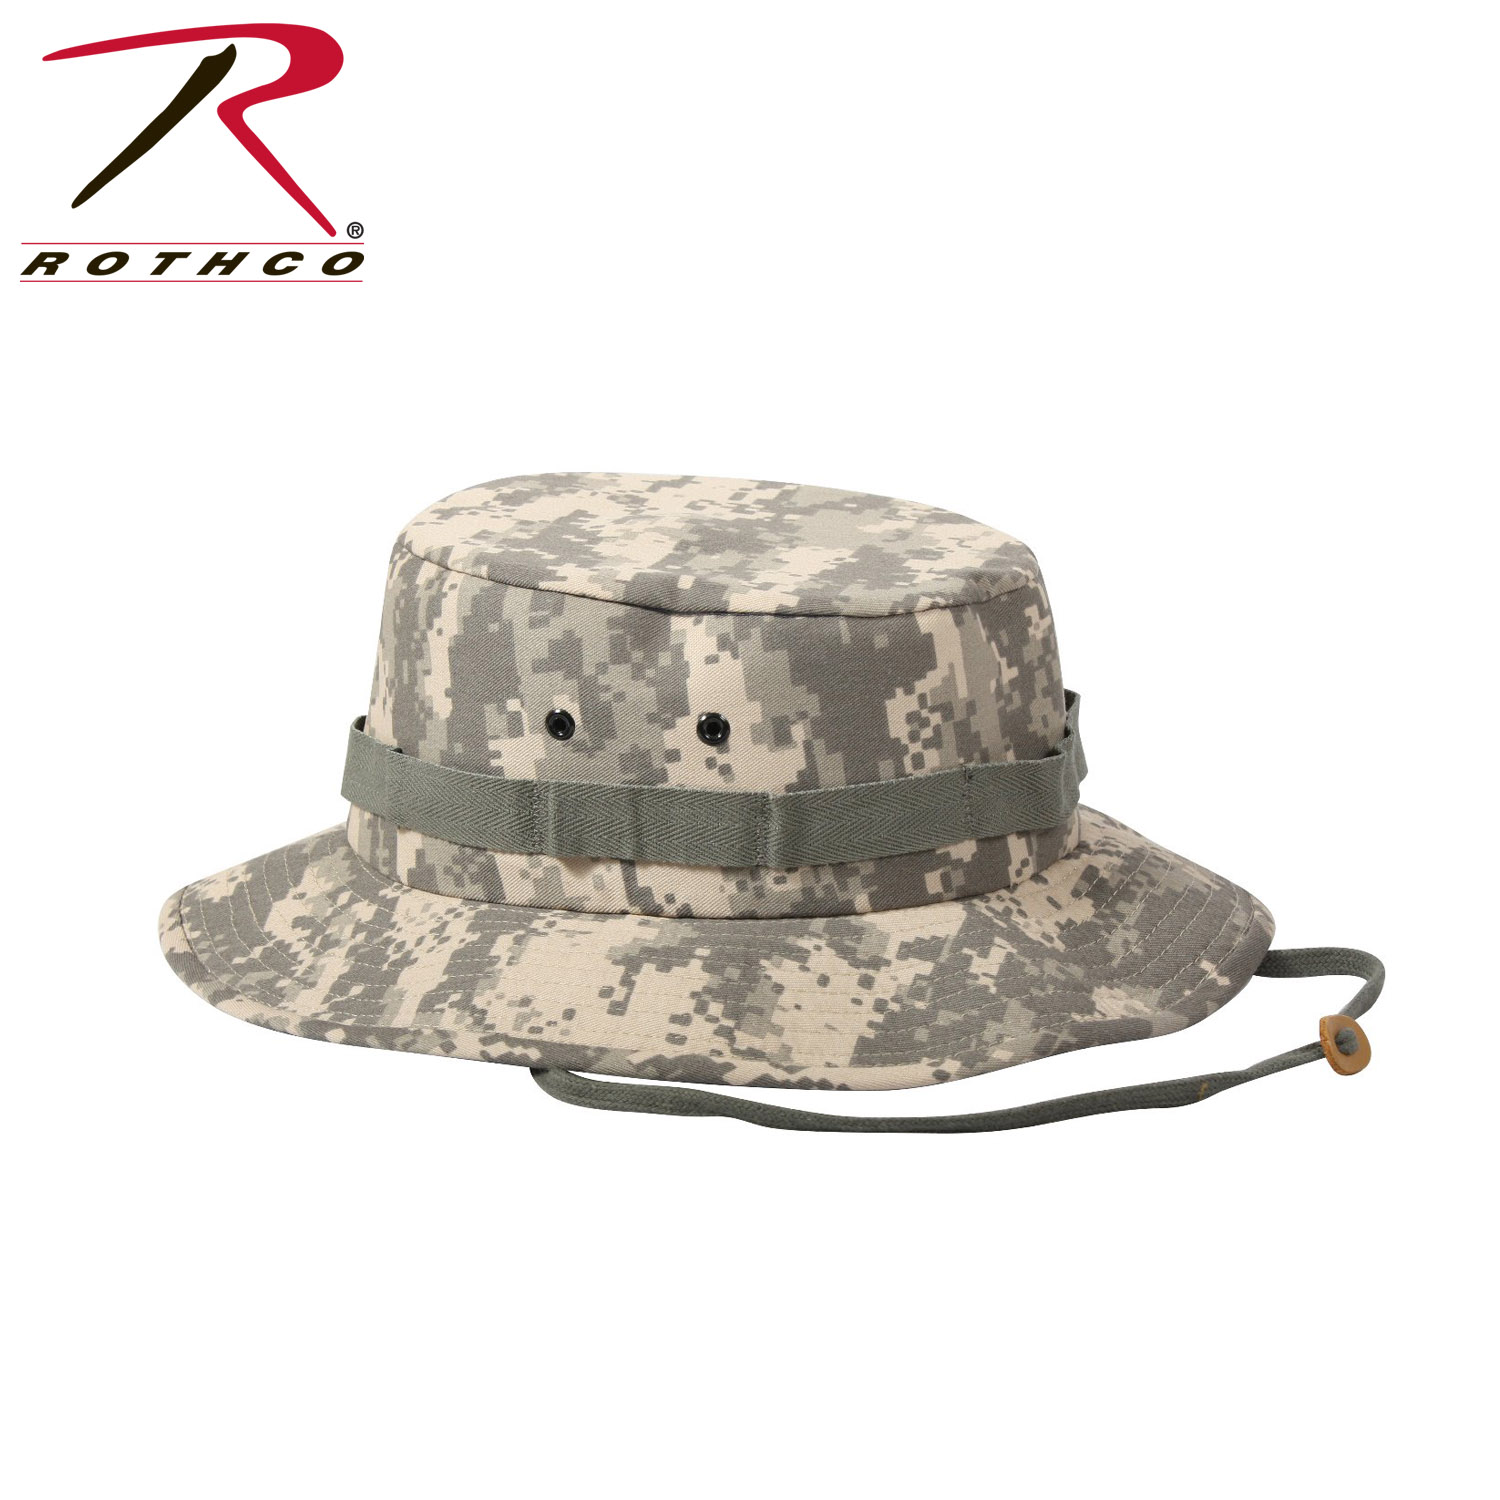 https://www.armyheritage.org/wp-content/uploads/2020/08/Youth20Digi20Camo20Boonie20Hat.jpg